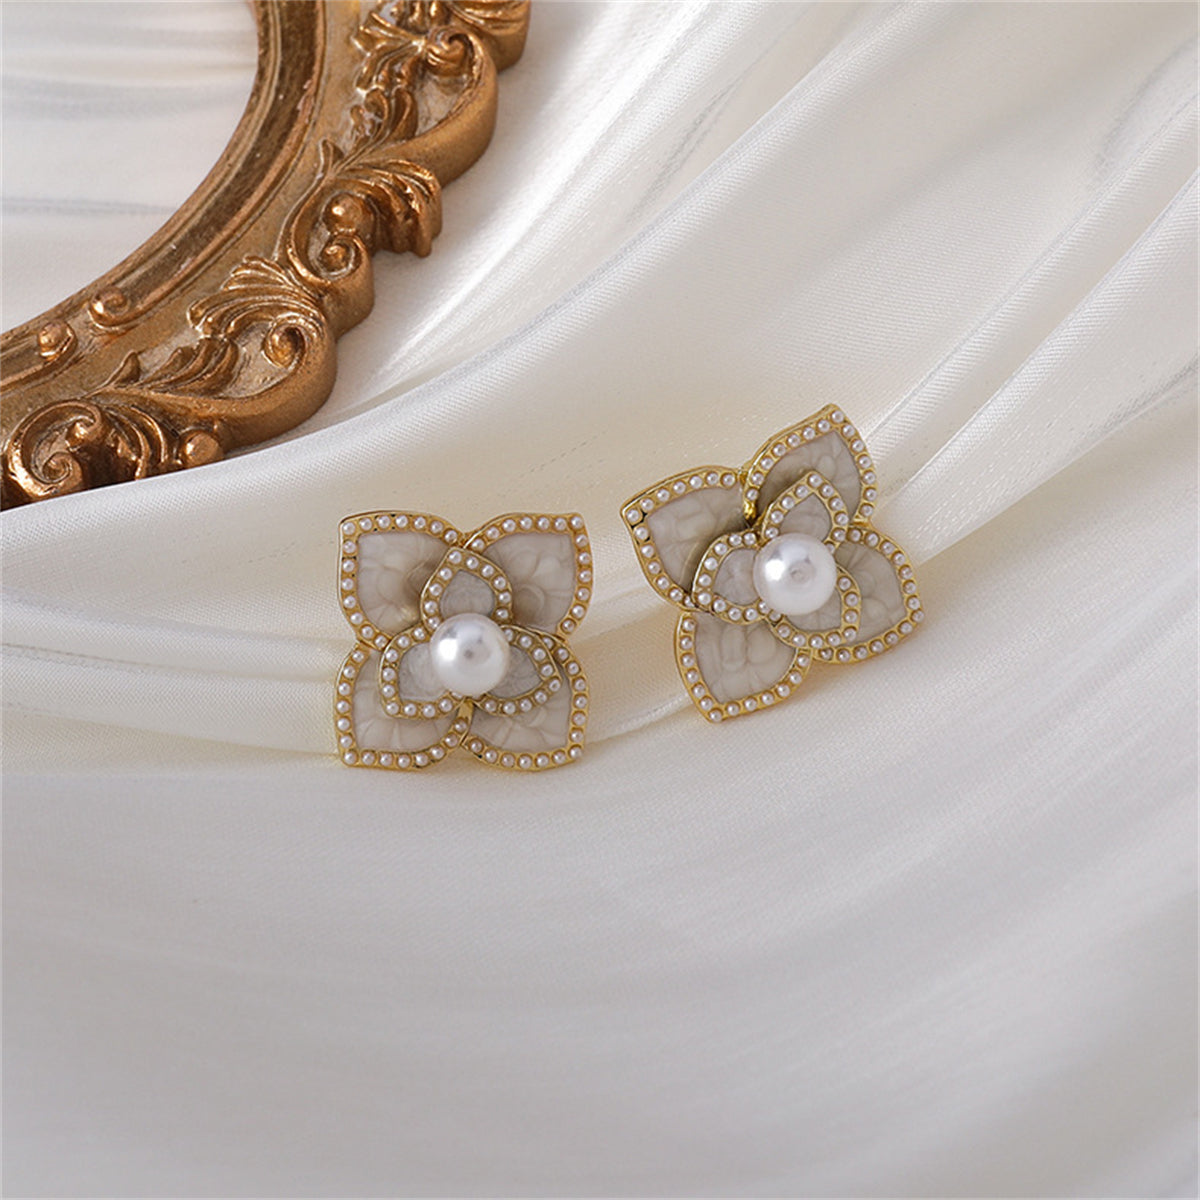 Pearl & White Camellia 18K Gold-Plated Stud Earrings